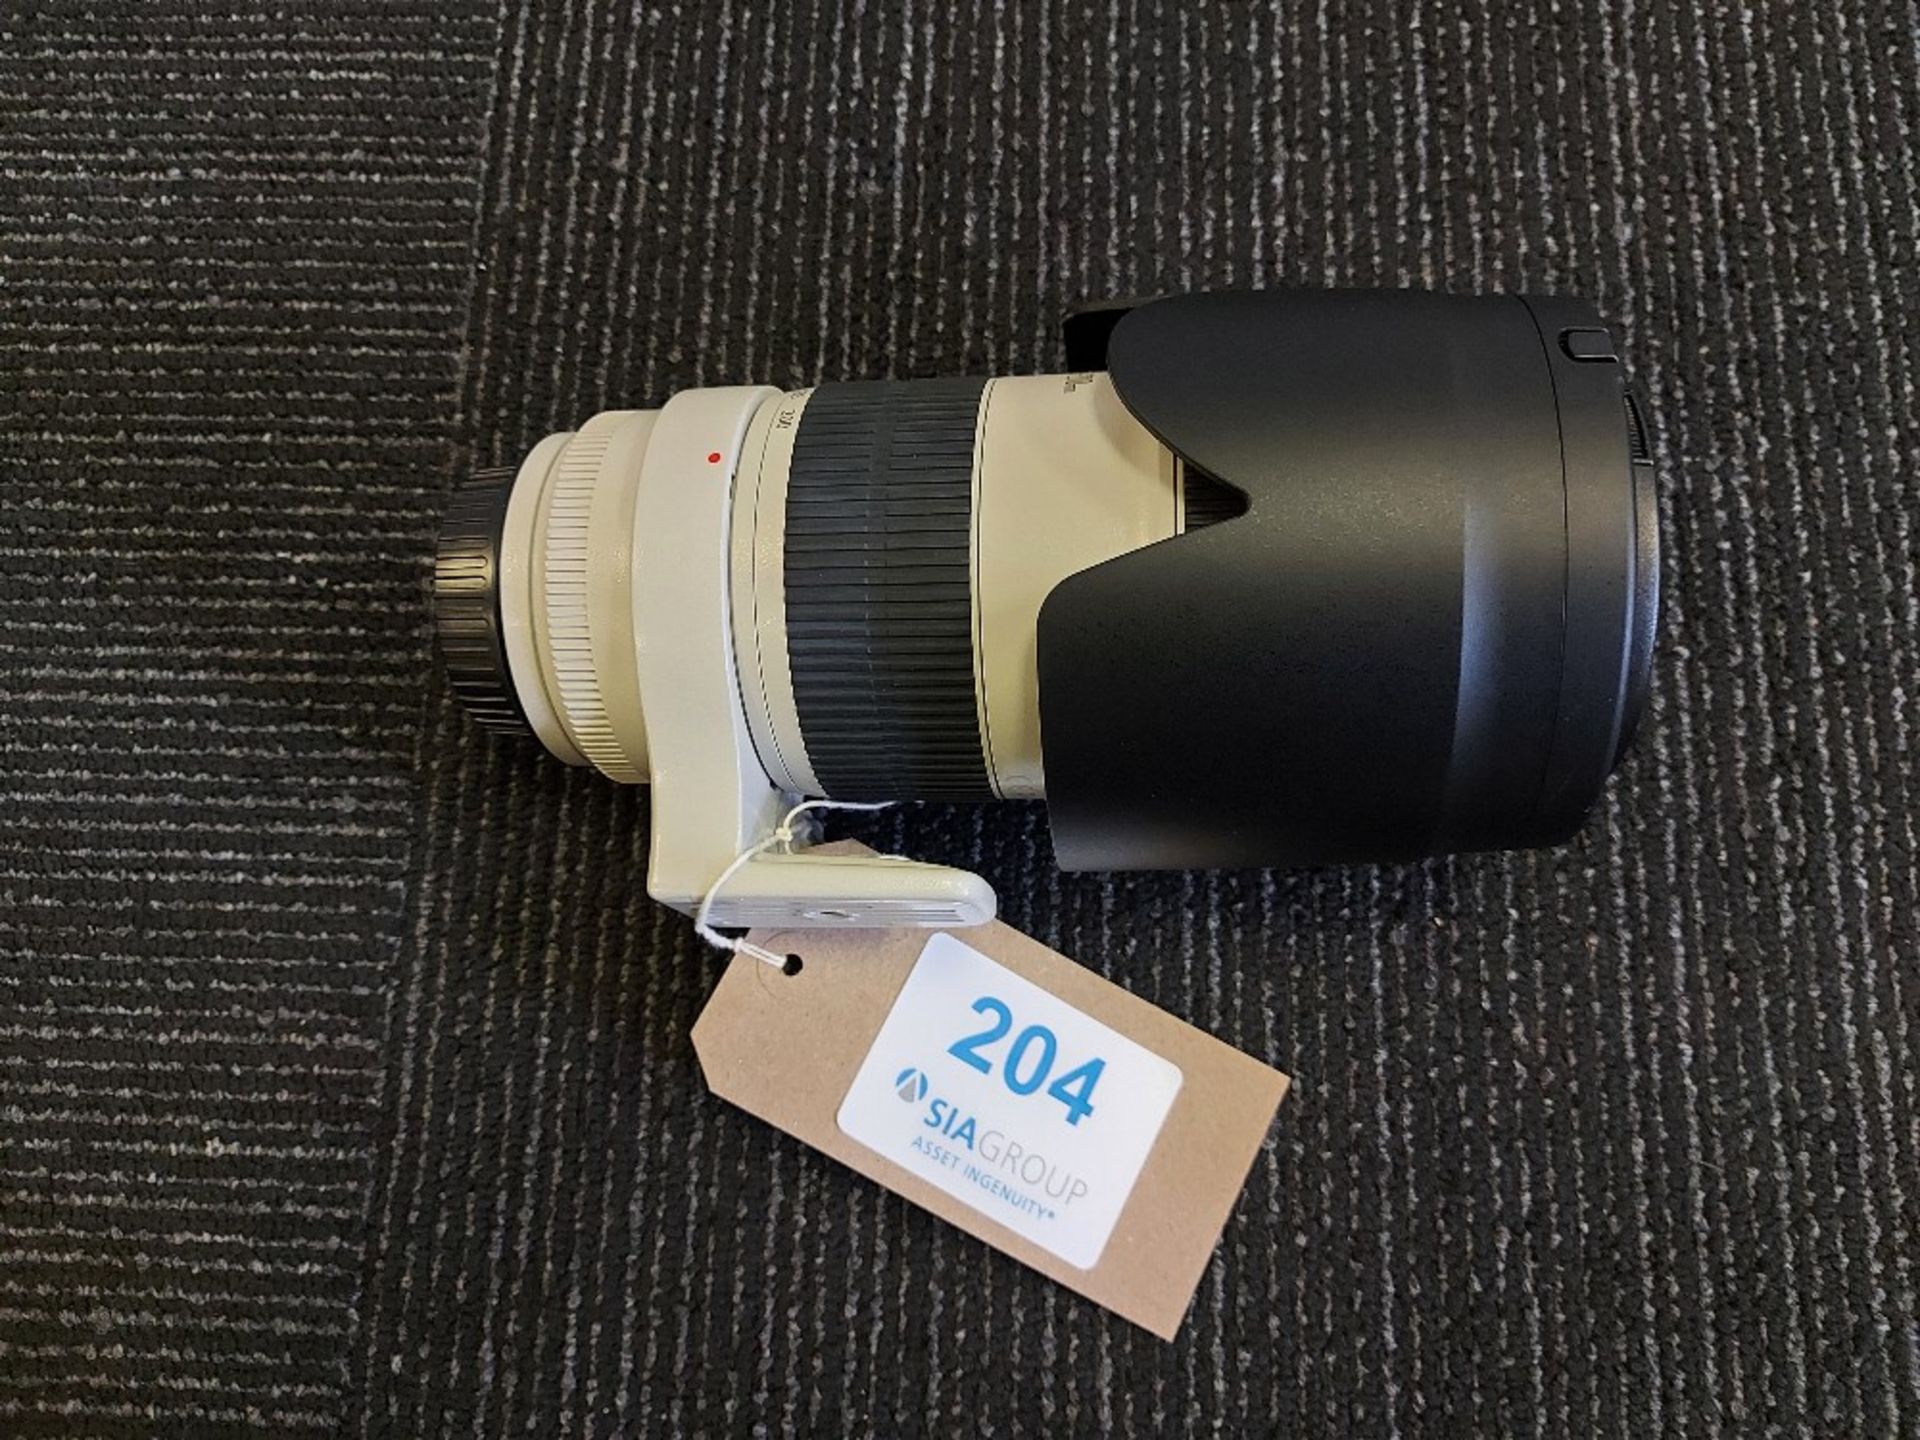 Canon Zoom EF 70-200mm 1:2.8 L IS II USM lens attachment - Image 2 of 8